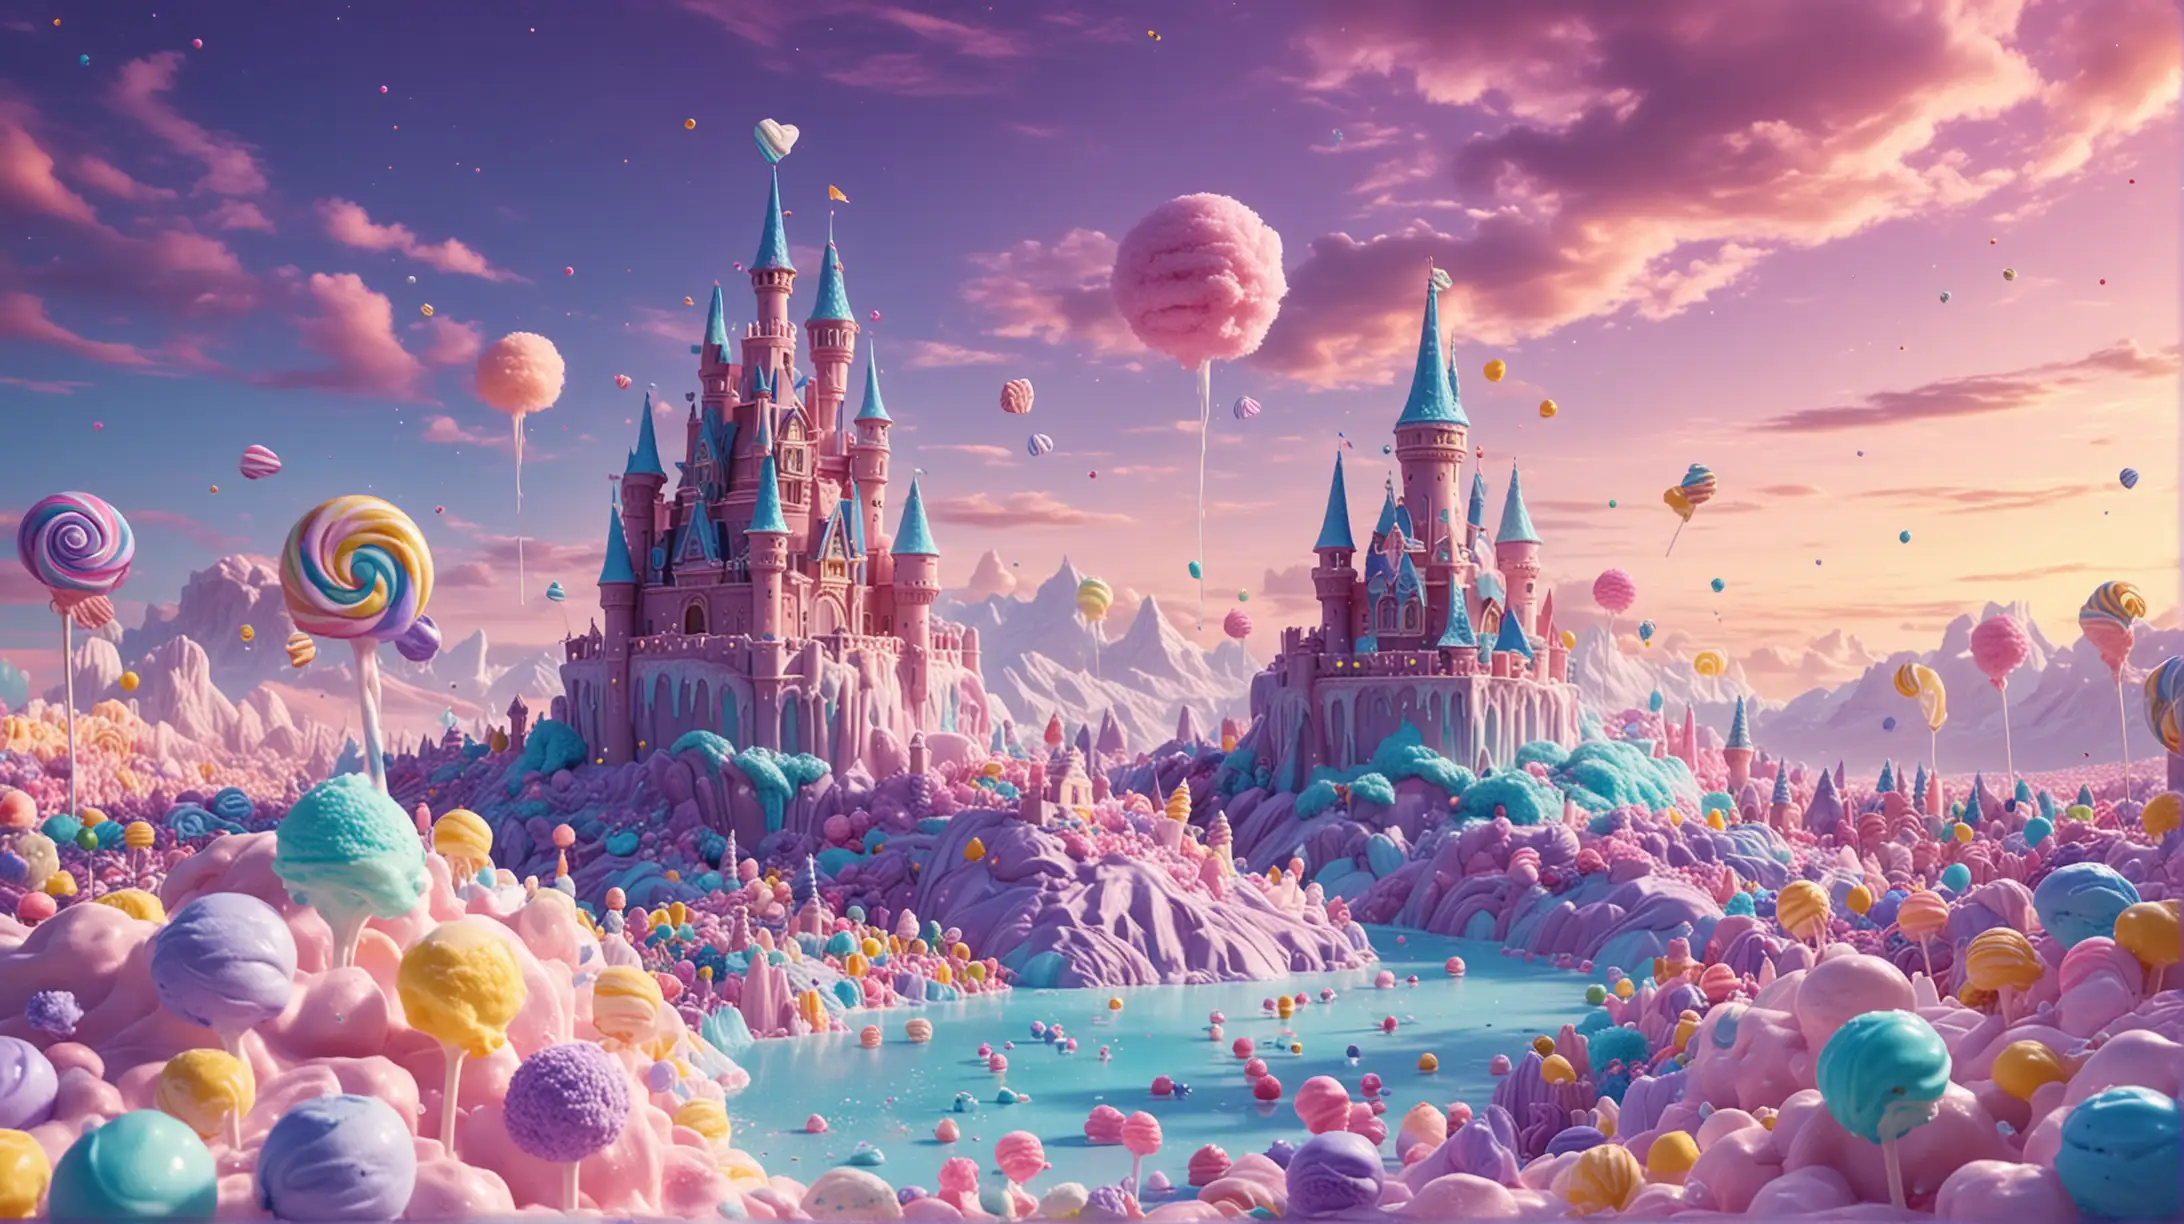 Whimsical Candy Wonderland Fairytale Castles and Sugary Skies